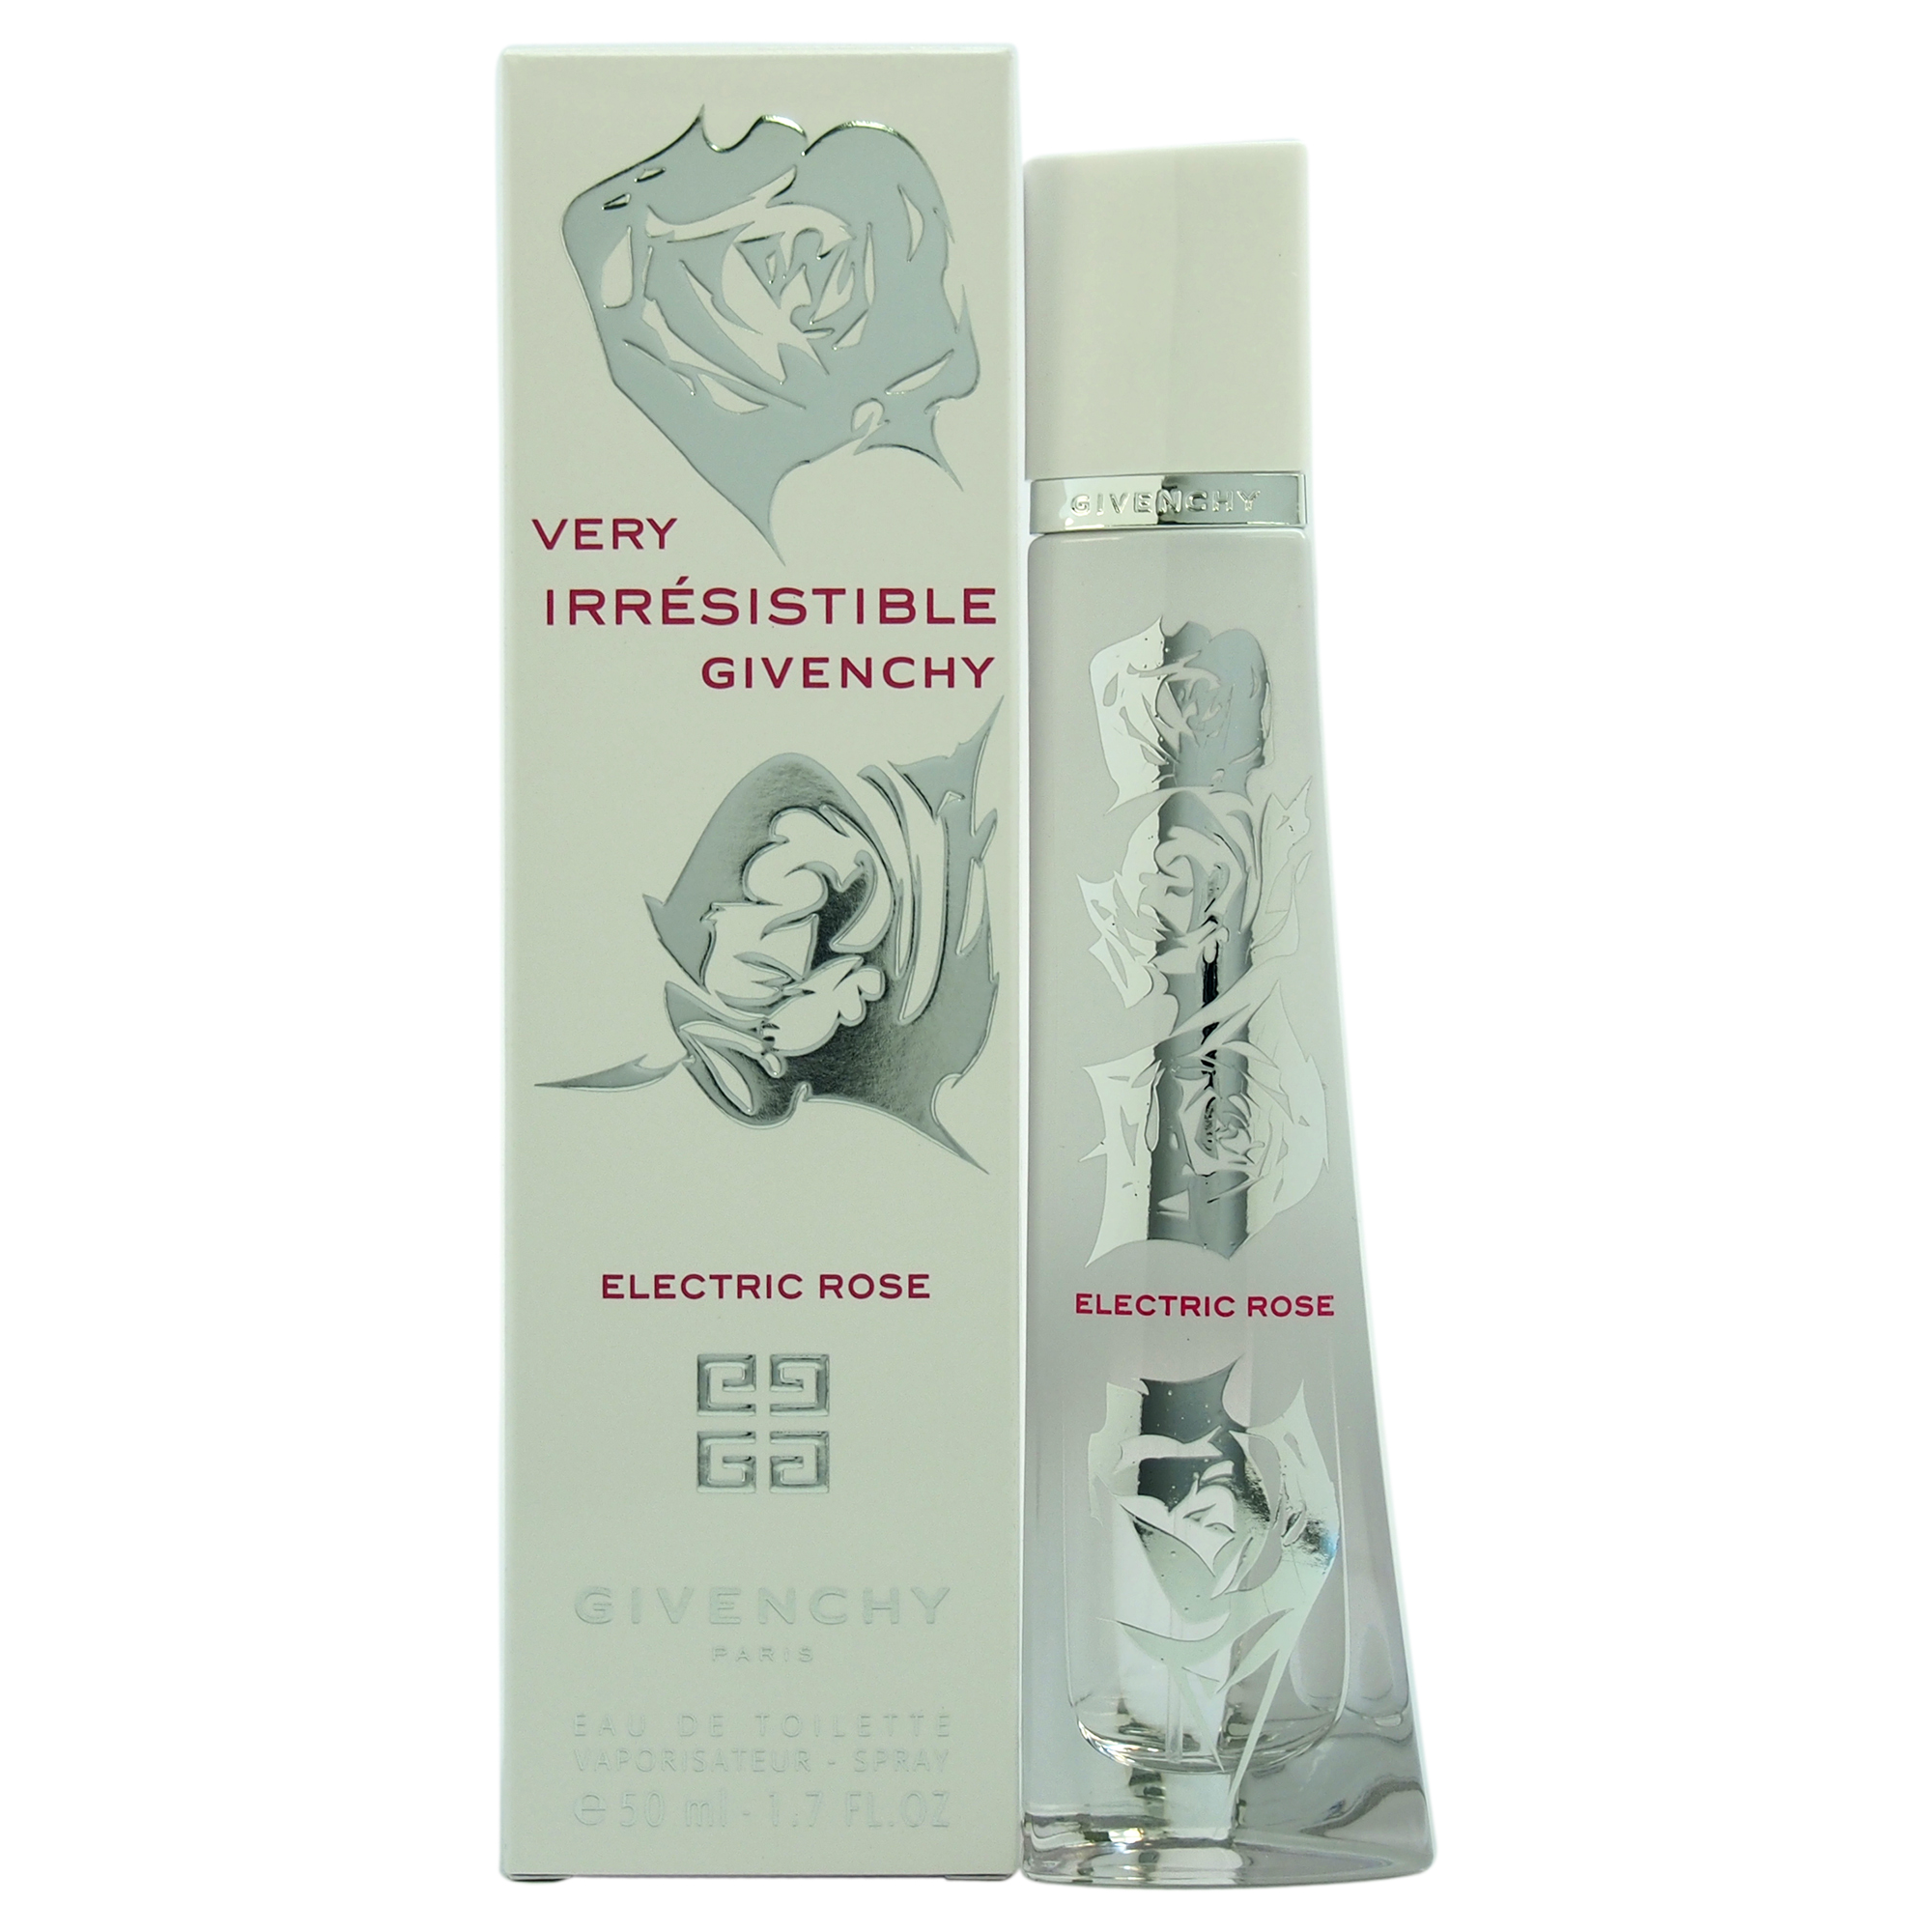 VERY IRRESISTIBLE ELECTRIC ROSE by Givenchy for Women - 1.7 oz EDT Spray